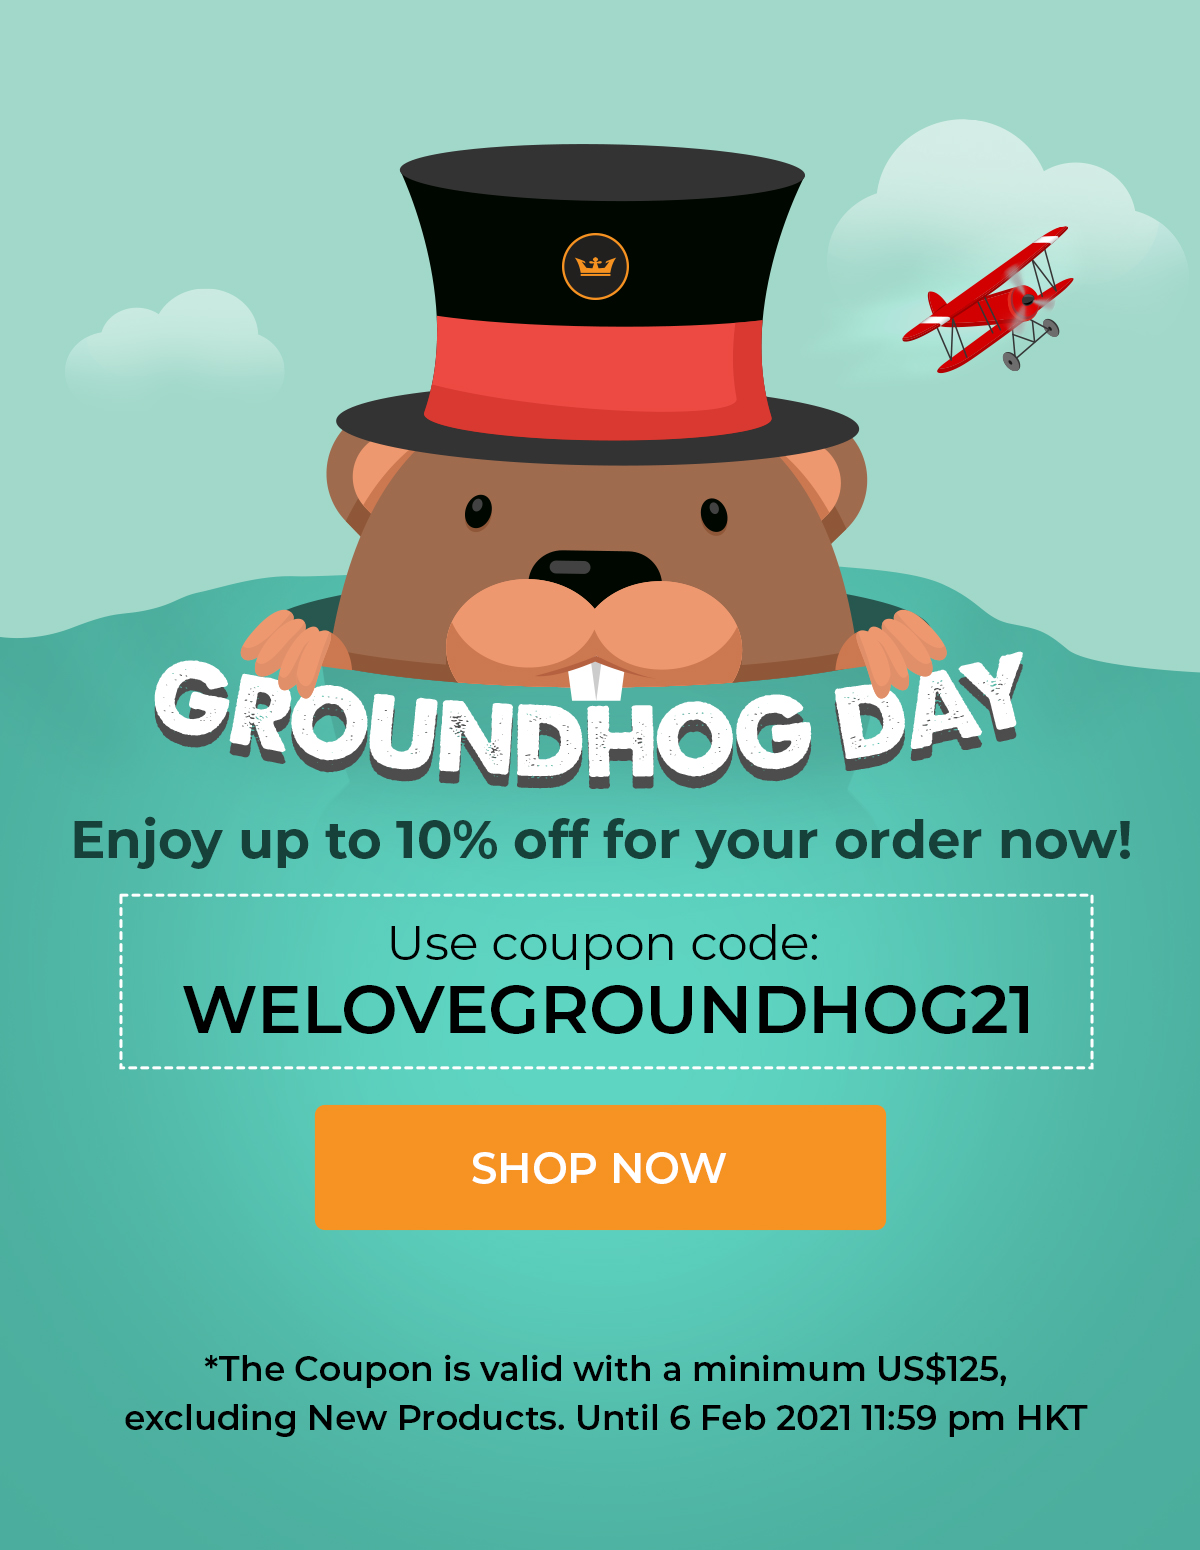 Enjoy 10% off for your order with our Groundhog Day Coupon Code: WELOVEGROUNDHOG21